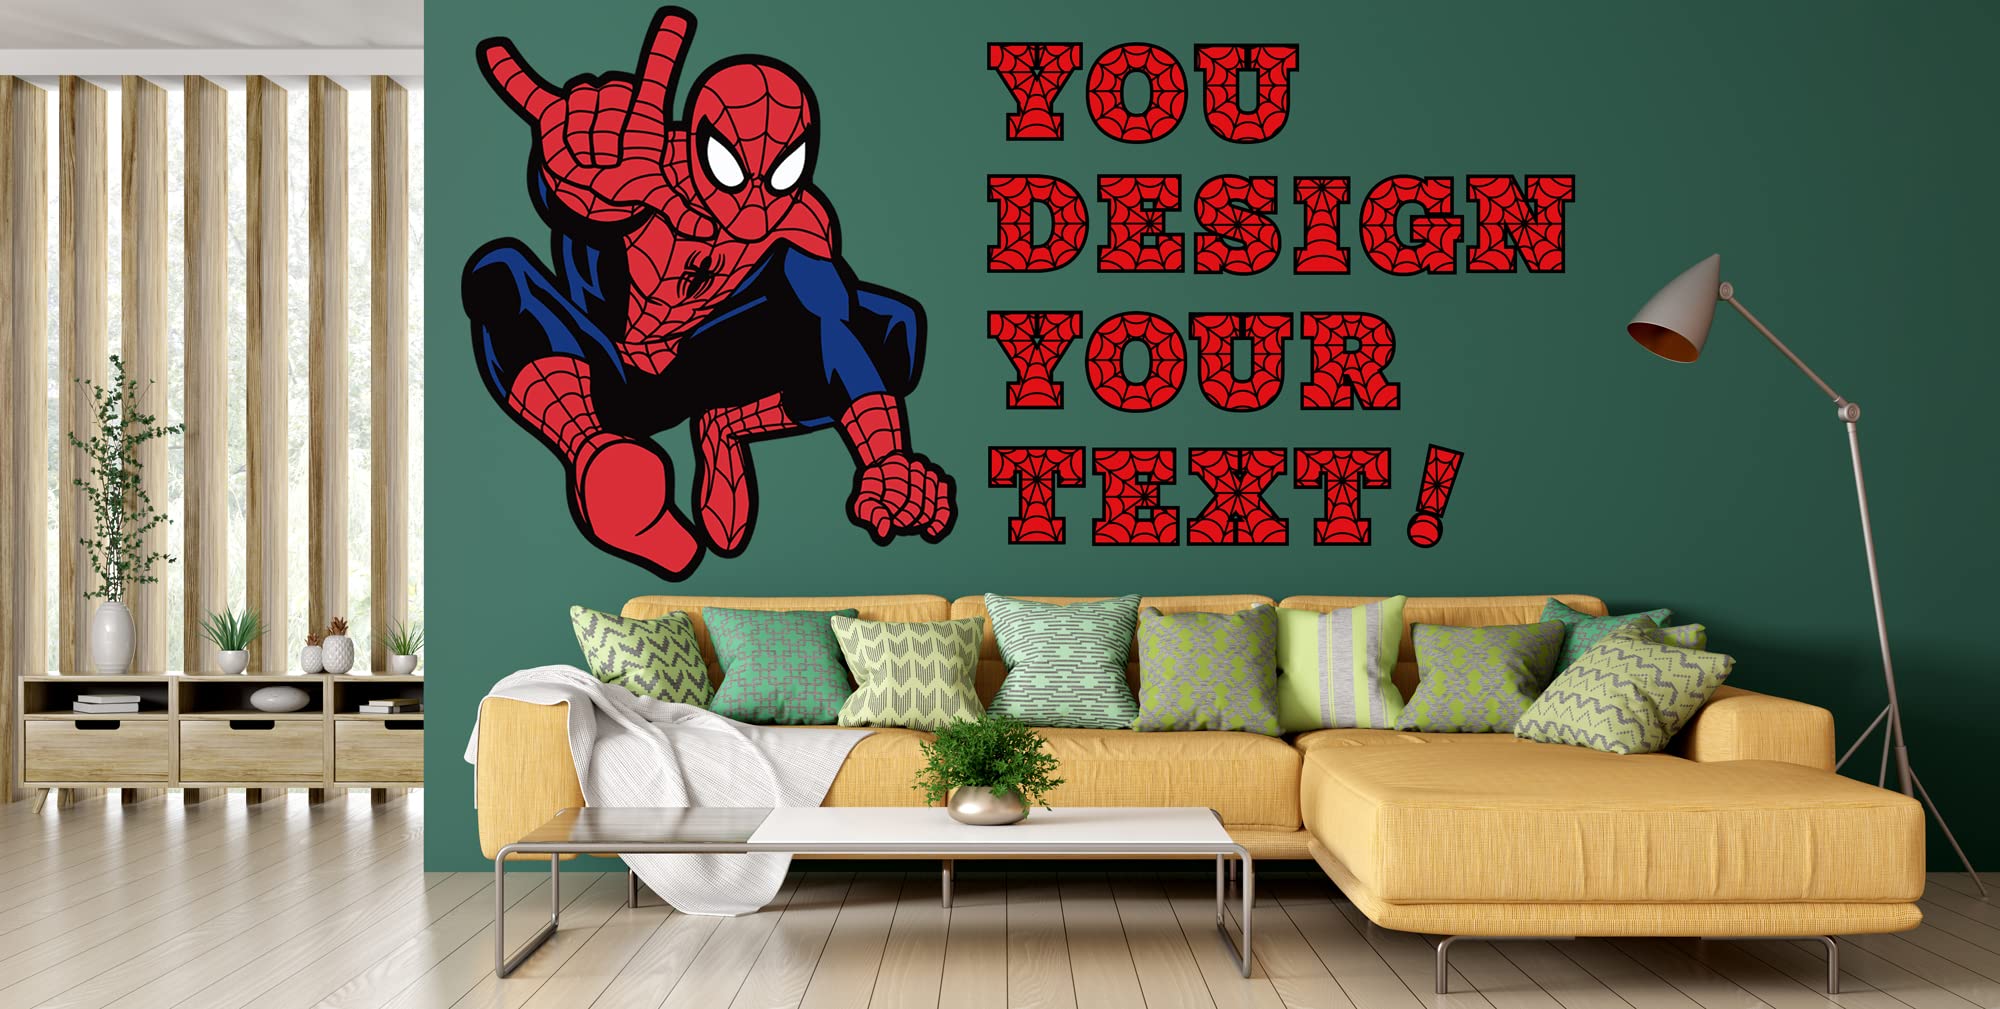 【3 Sizes】【You Design Your Text】17.7"W x 20.5"H Wall Decal with 26 Letters Wall Decor Wall Stickers Room Decorations for Bedroom Nursery Playroom Gifts - S Size, 45cm x 52cm